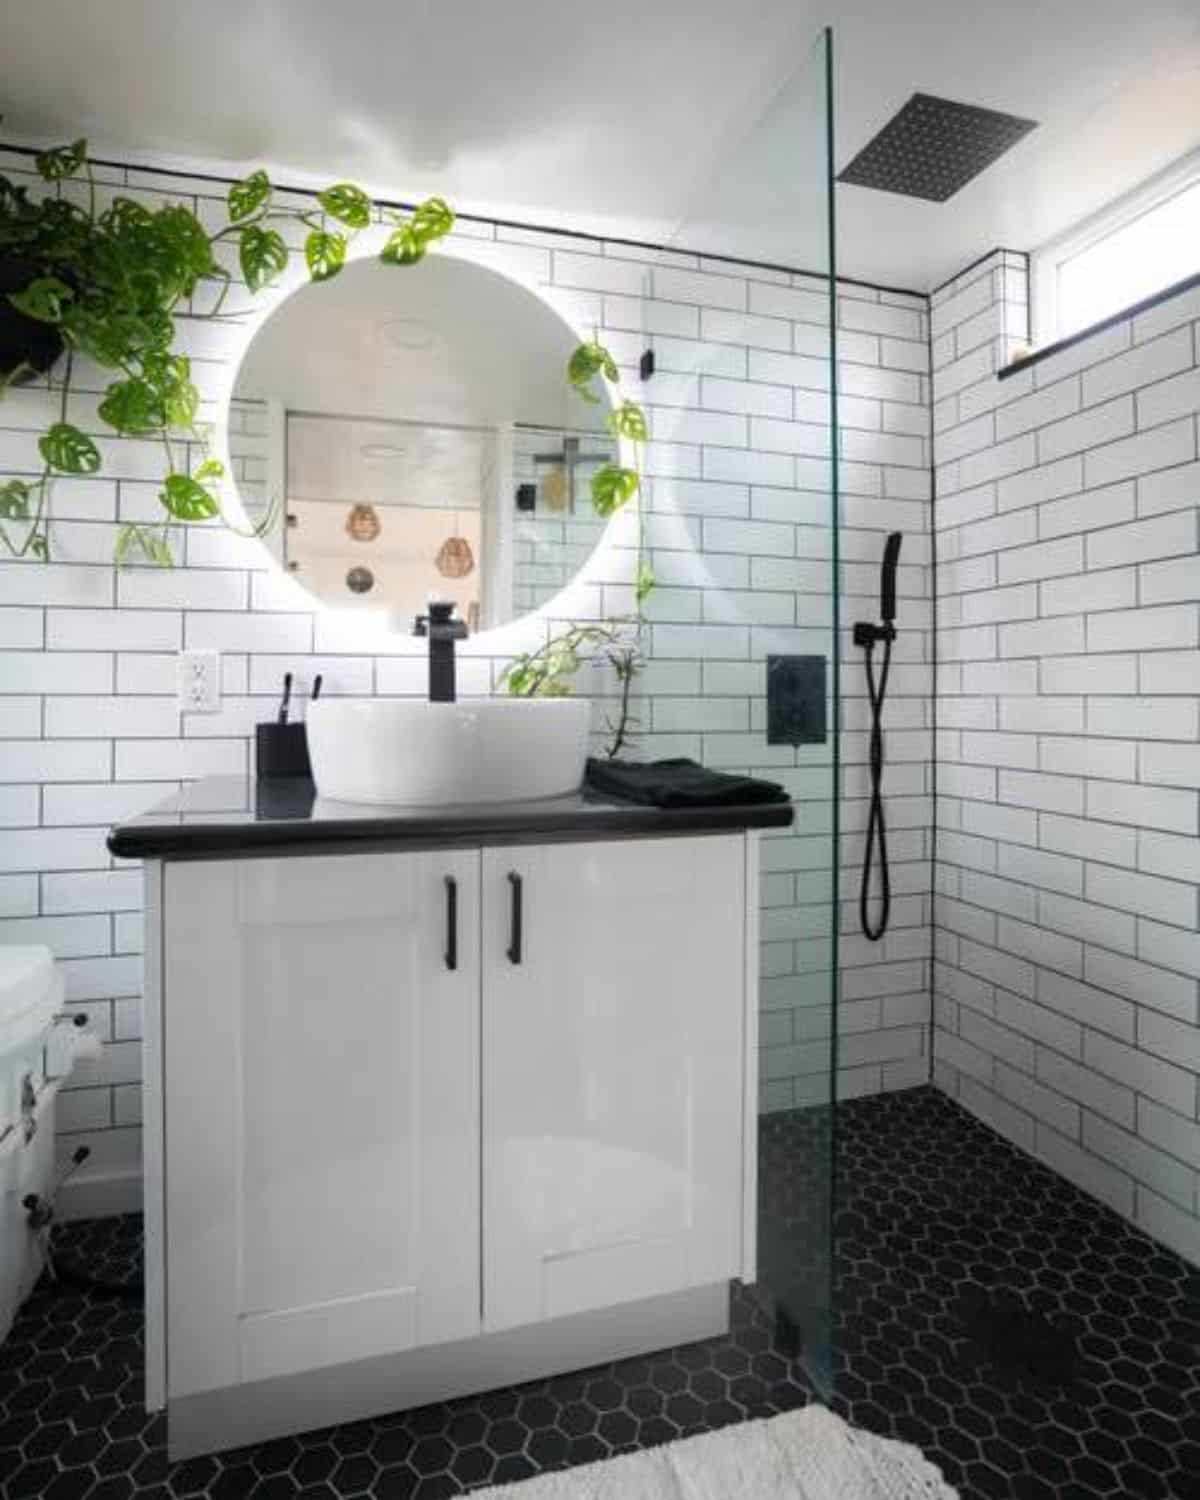 Bathroom is at another level with all the essentials but with stunning walls and floor